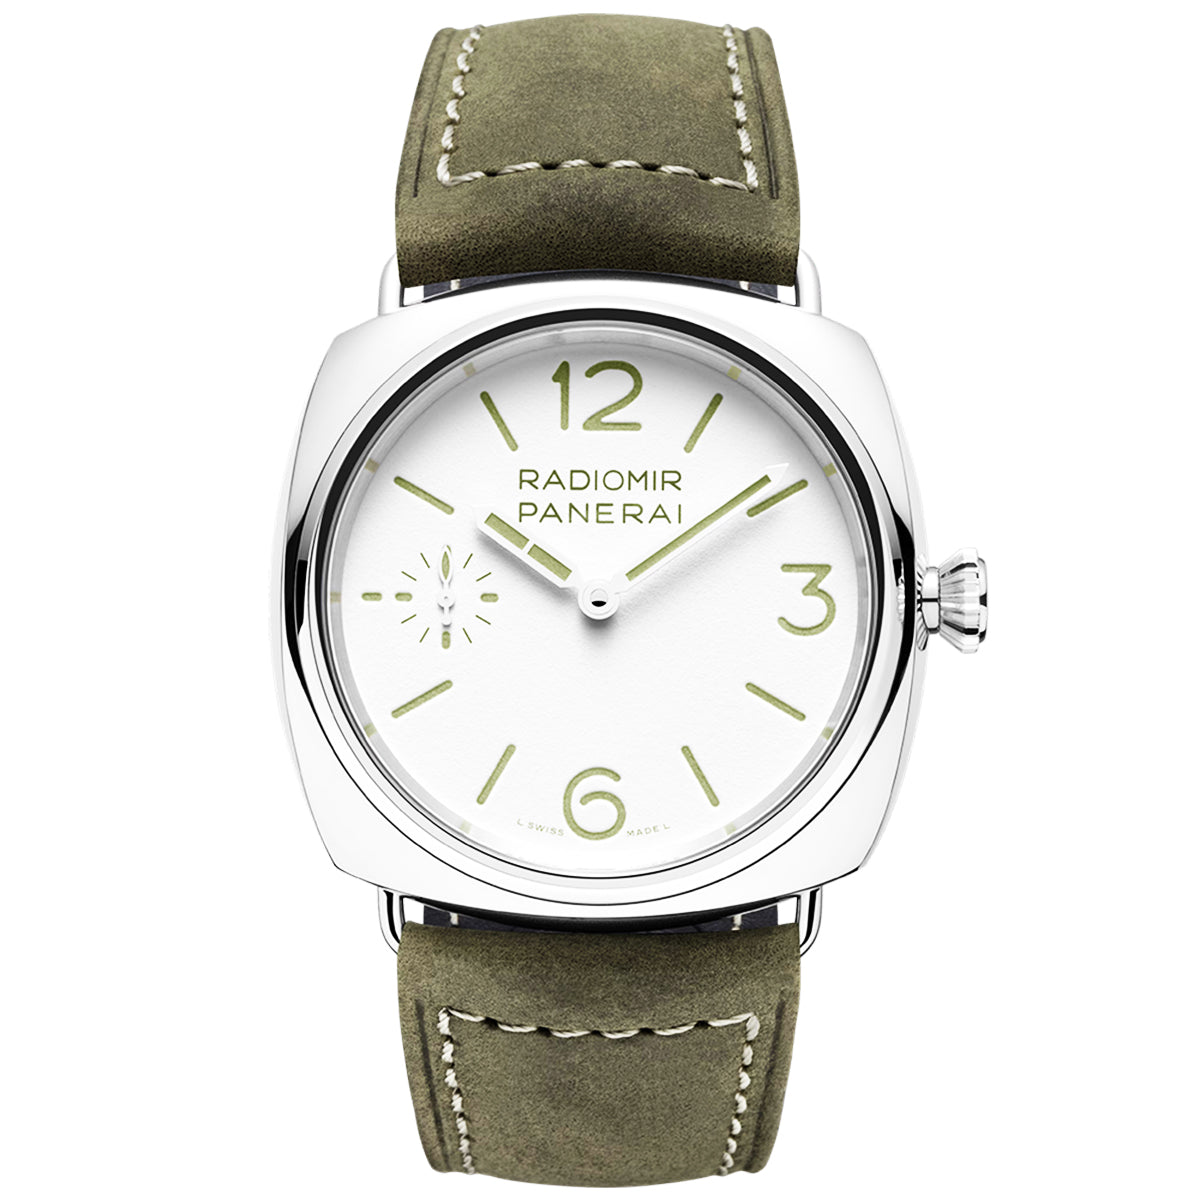 Radiomir Officine 45mm White Dial Manual-Wind Watch